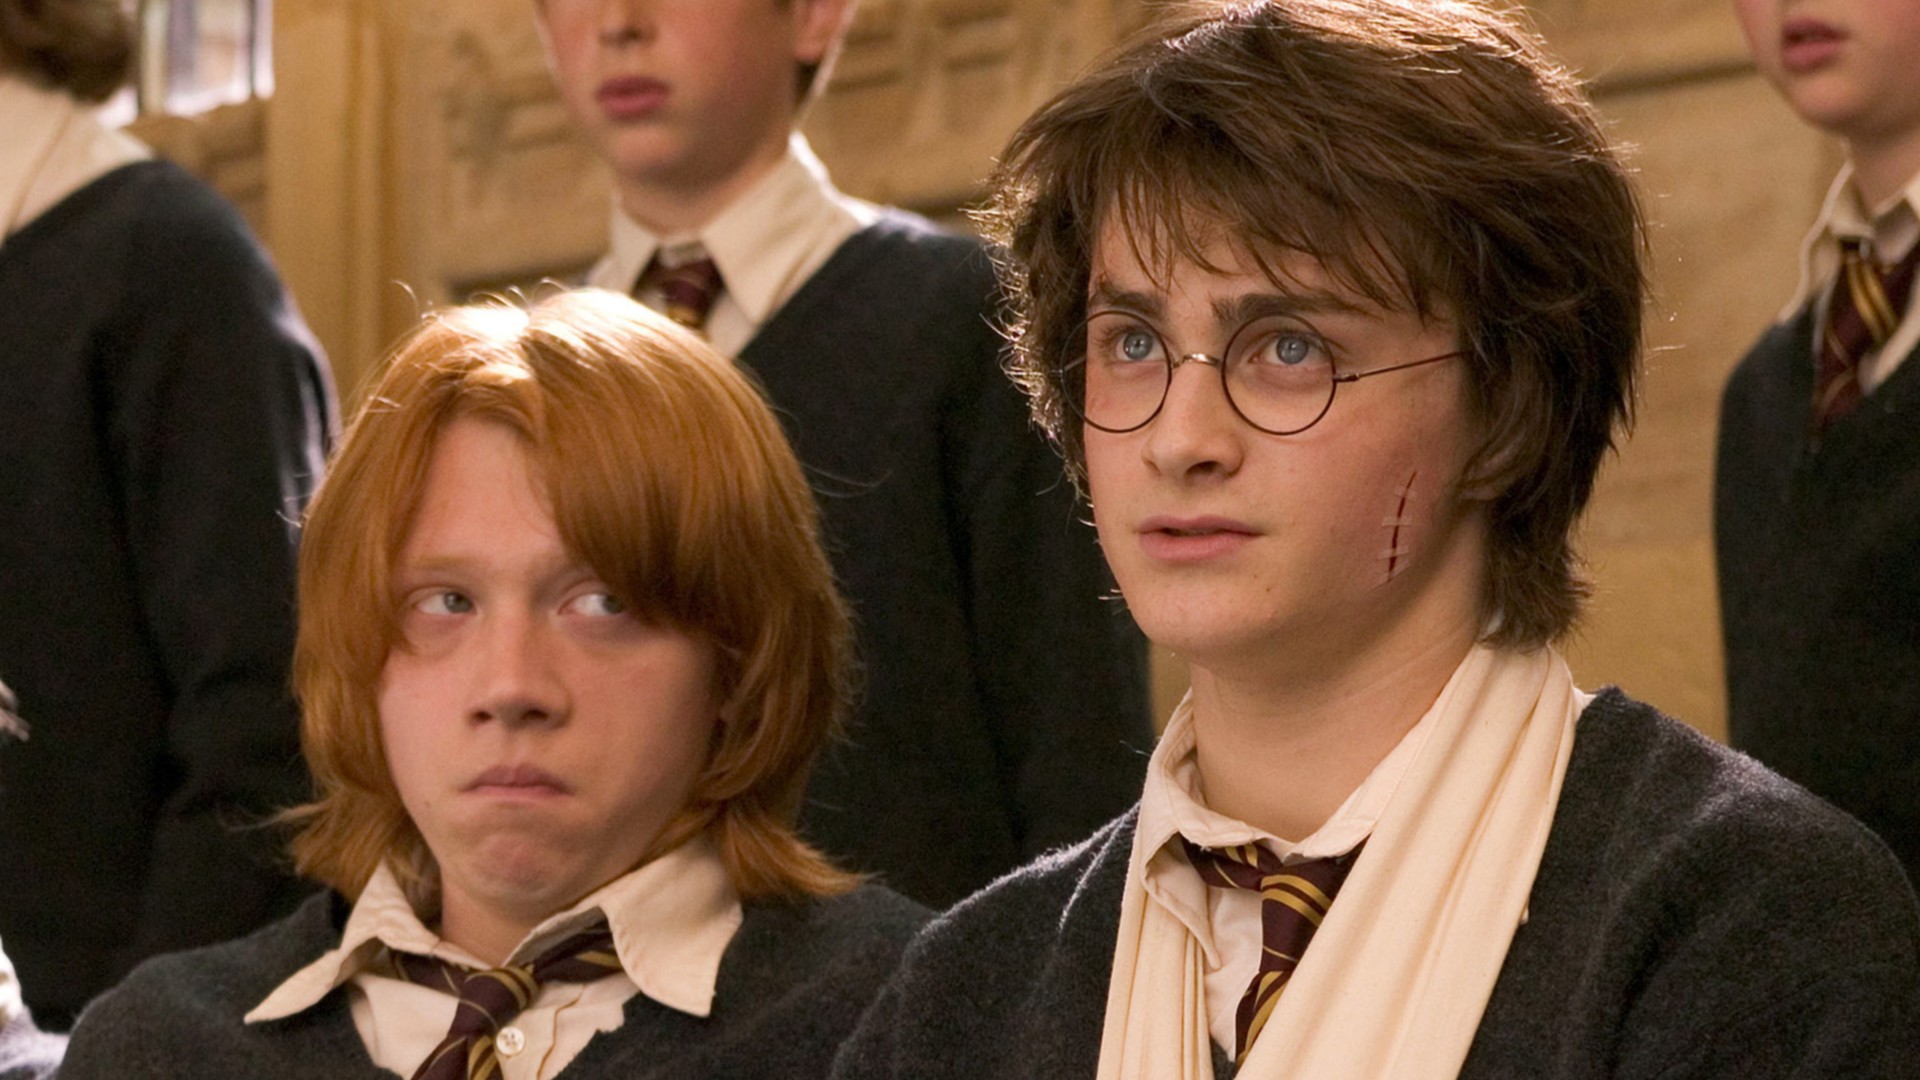 Harry Potter Fans Still Riled Up Over Controversial Miscast for a Key Role